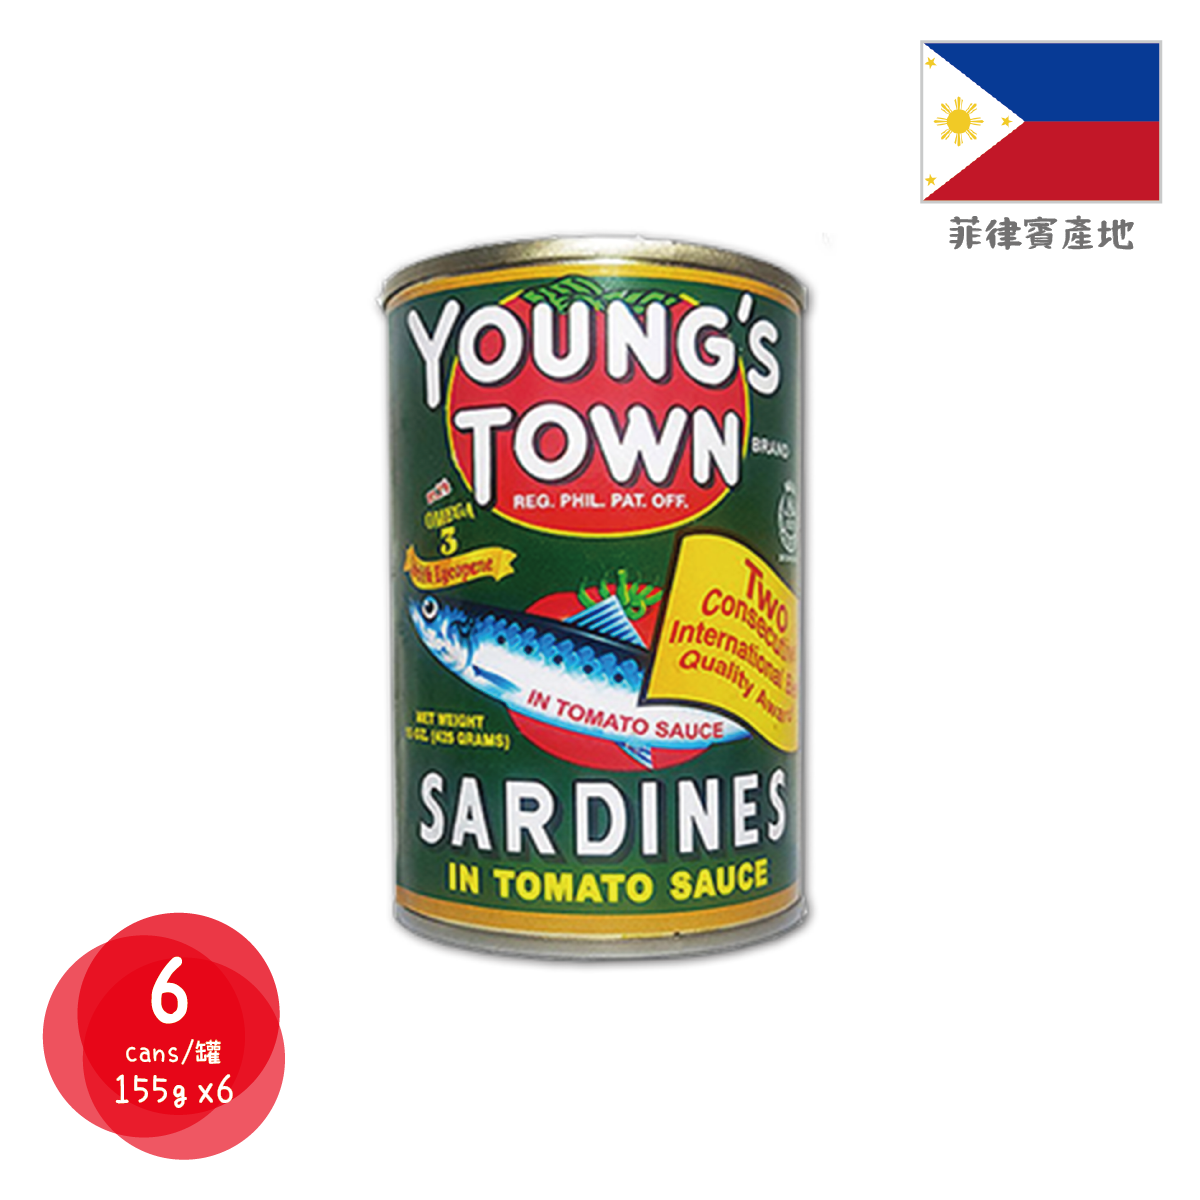 Sardines in Tomato Sauce x 6  # Imported from Philippines